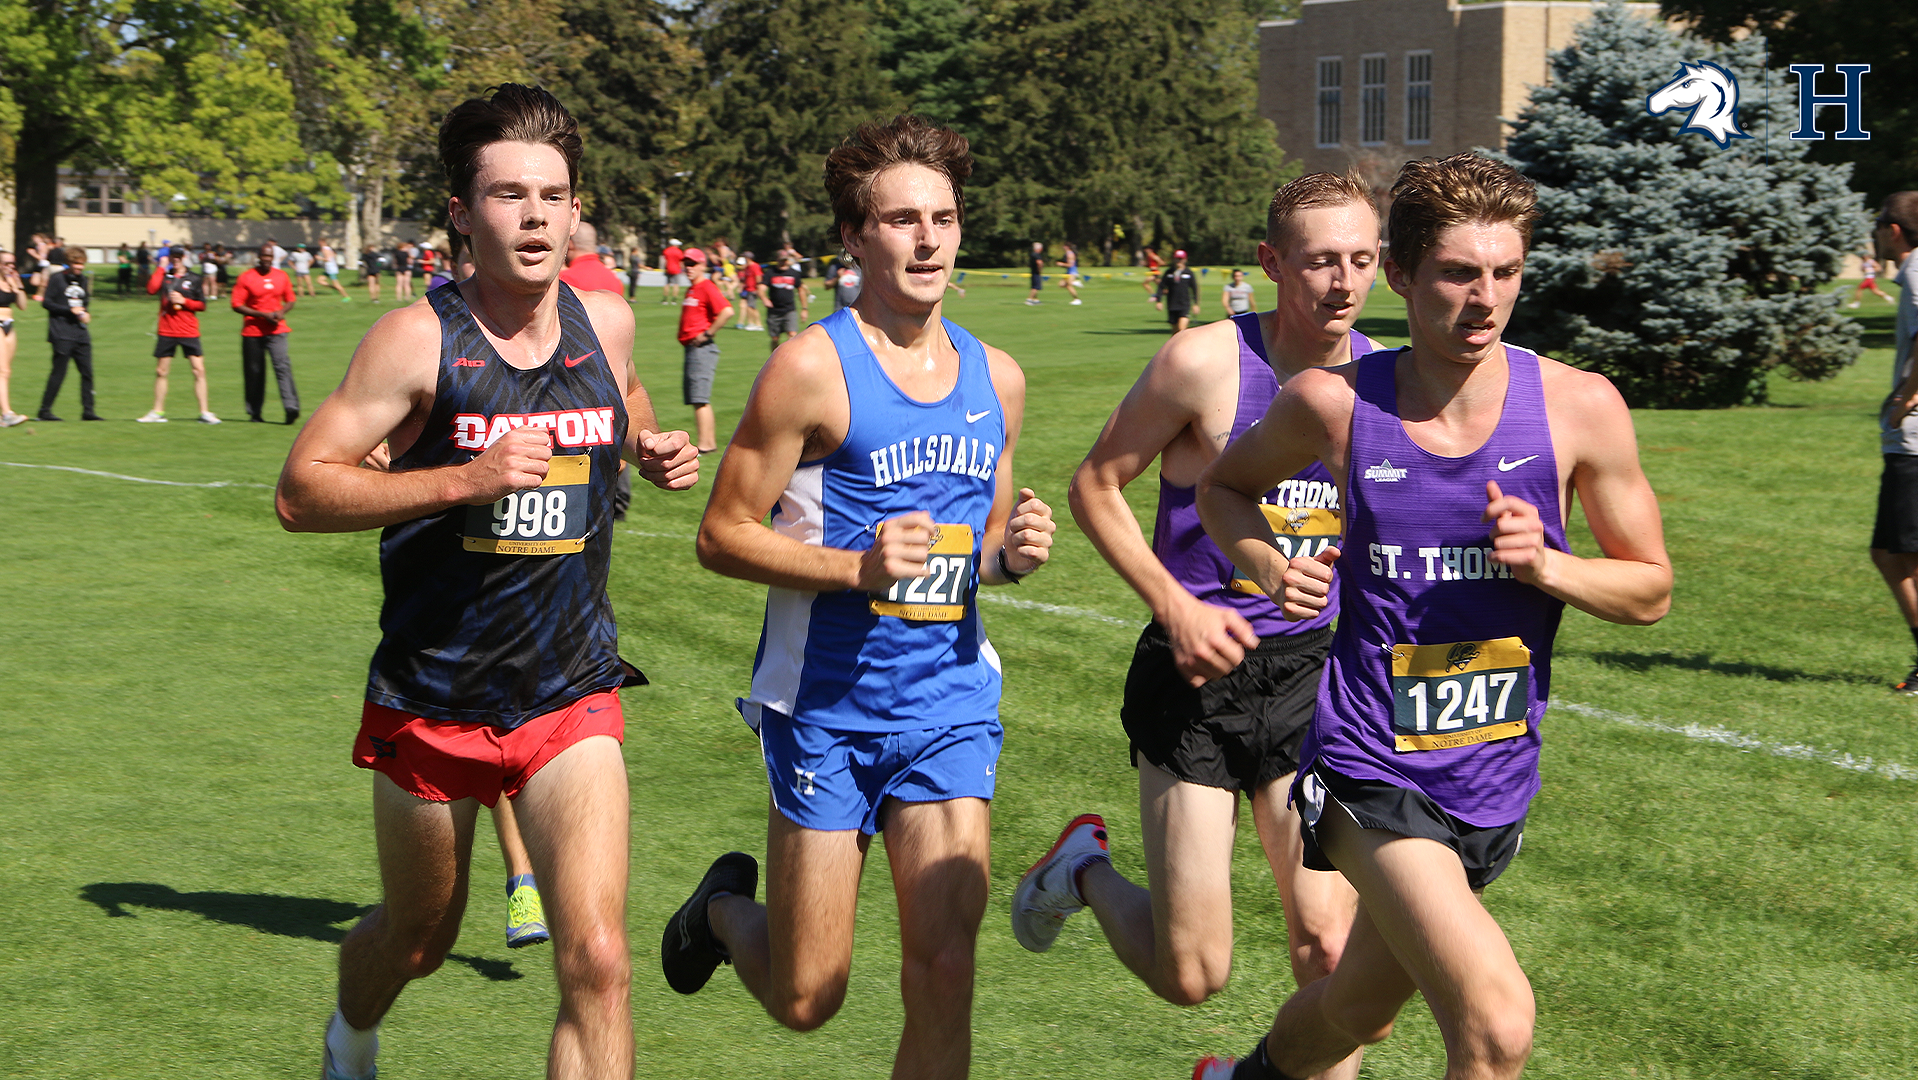 Charger men do well with split squads at Notre Dame, Lansing CC Invites